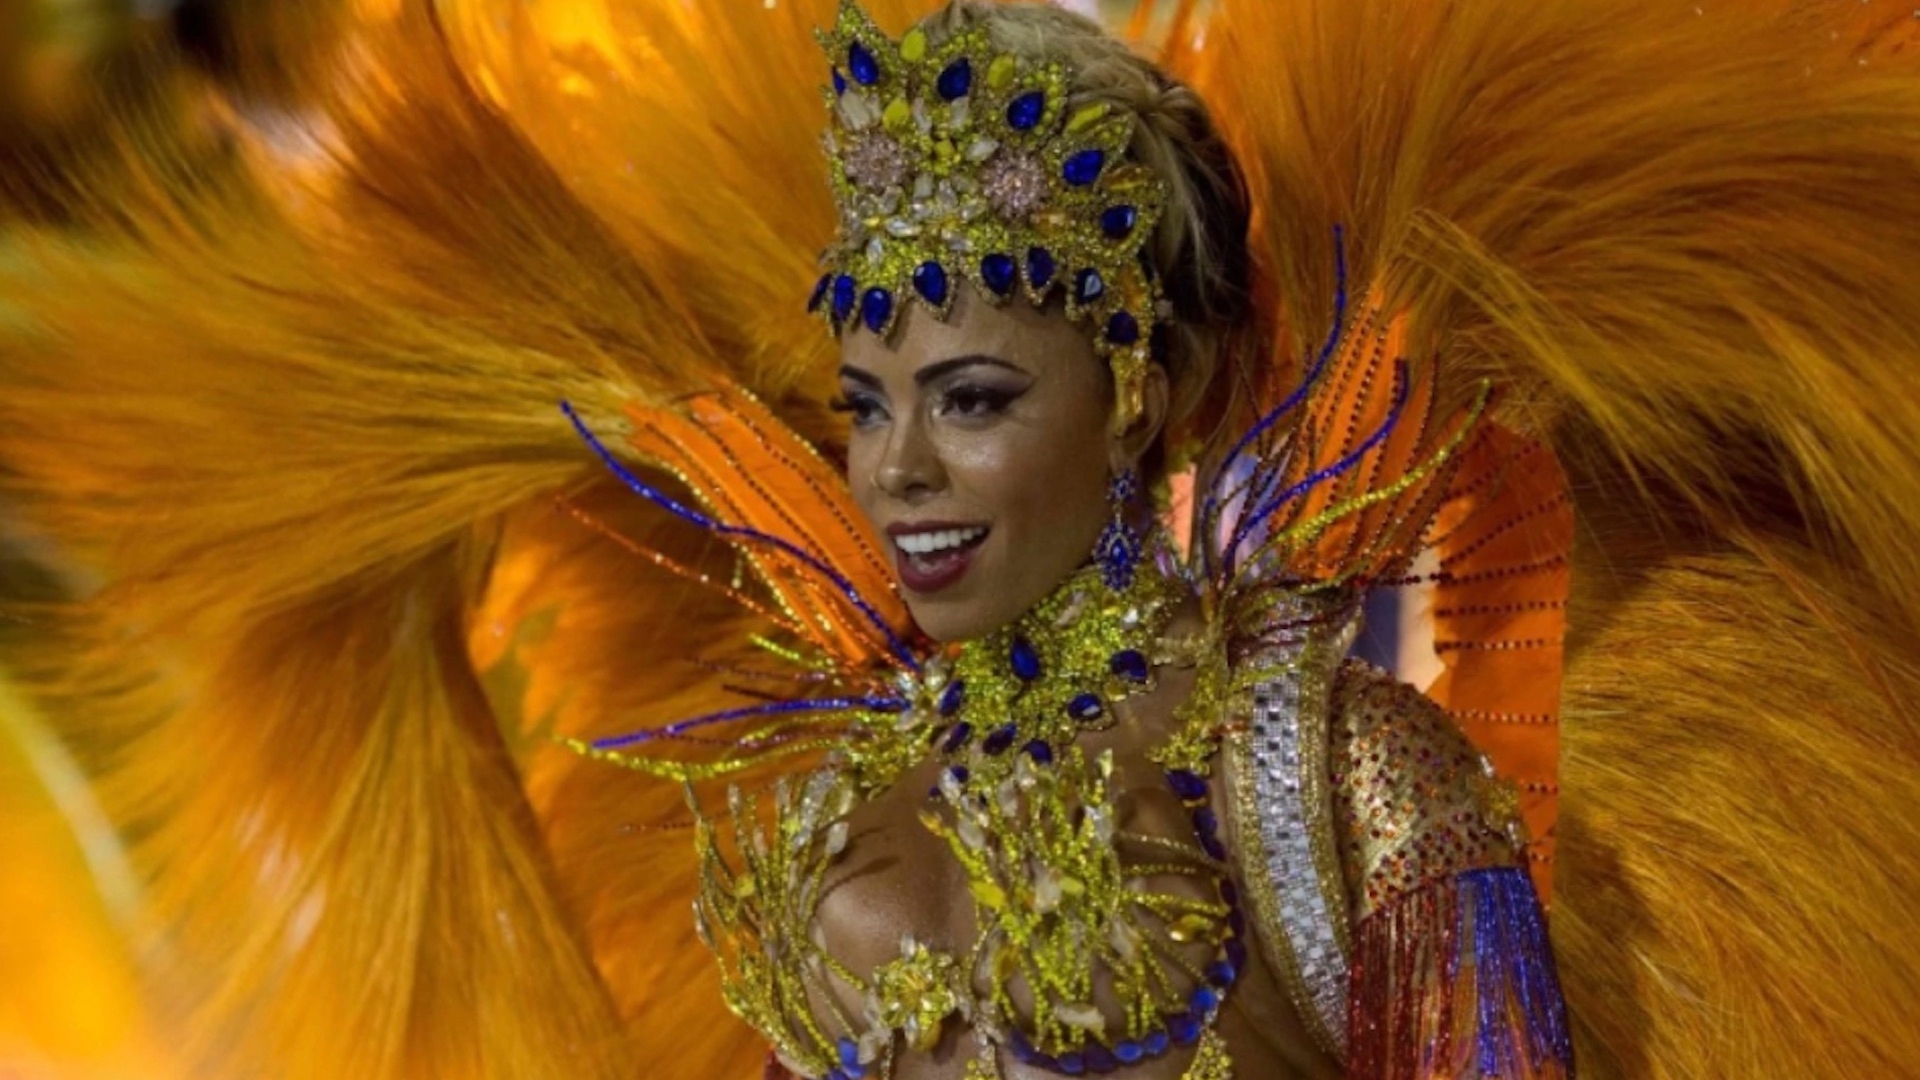 Rio S Carnival Goes Political And A Little Known Samba School Ignites A Firestorm The Washington Post